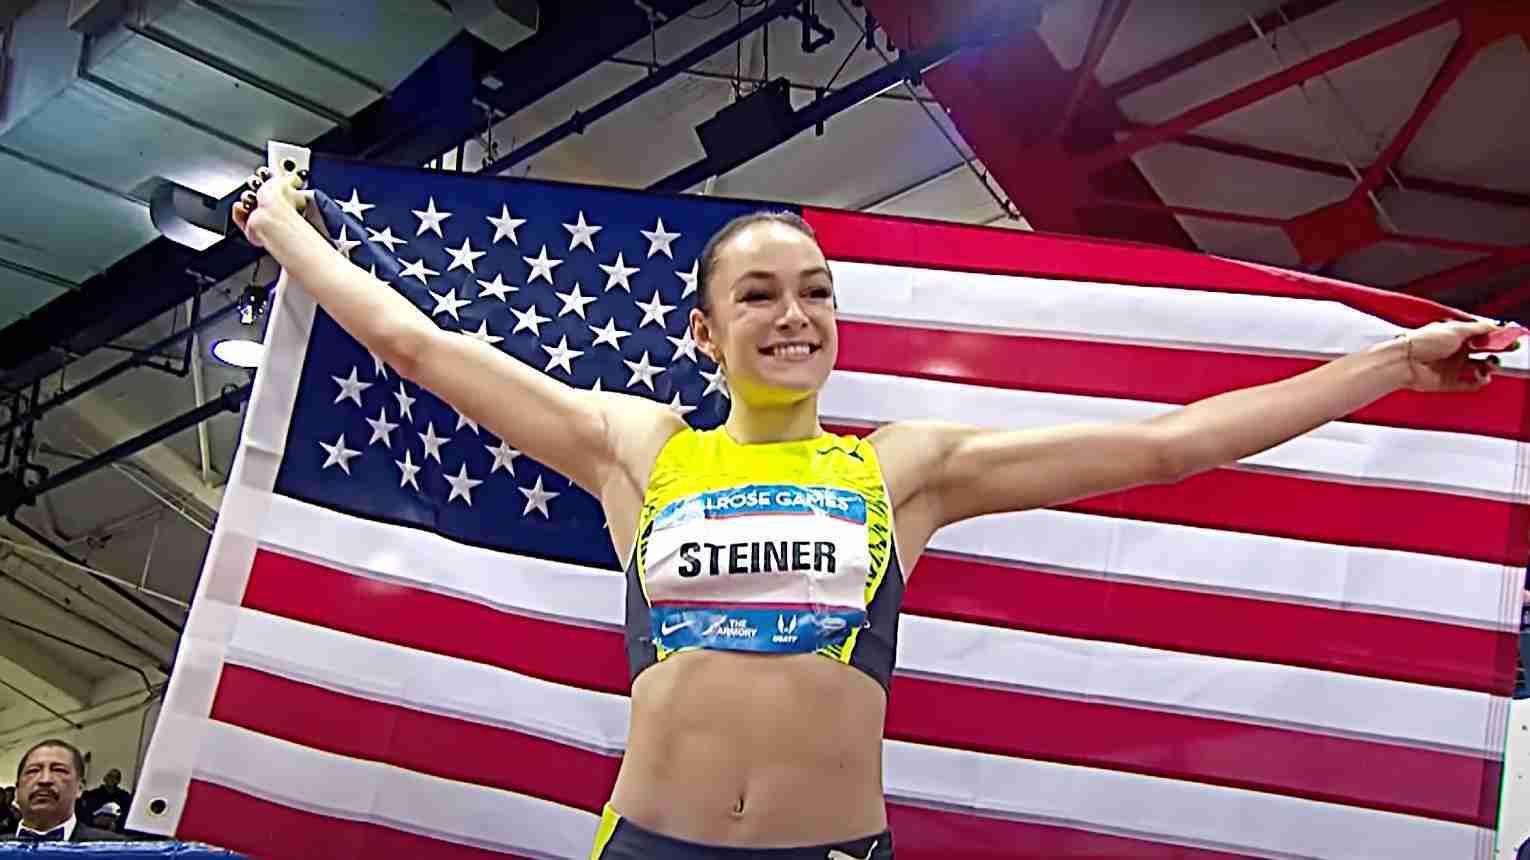 What are Abby Steiner 300m splits en route to 35.54 NR?